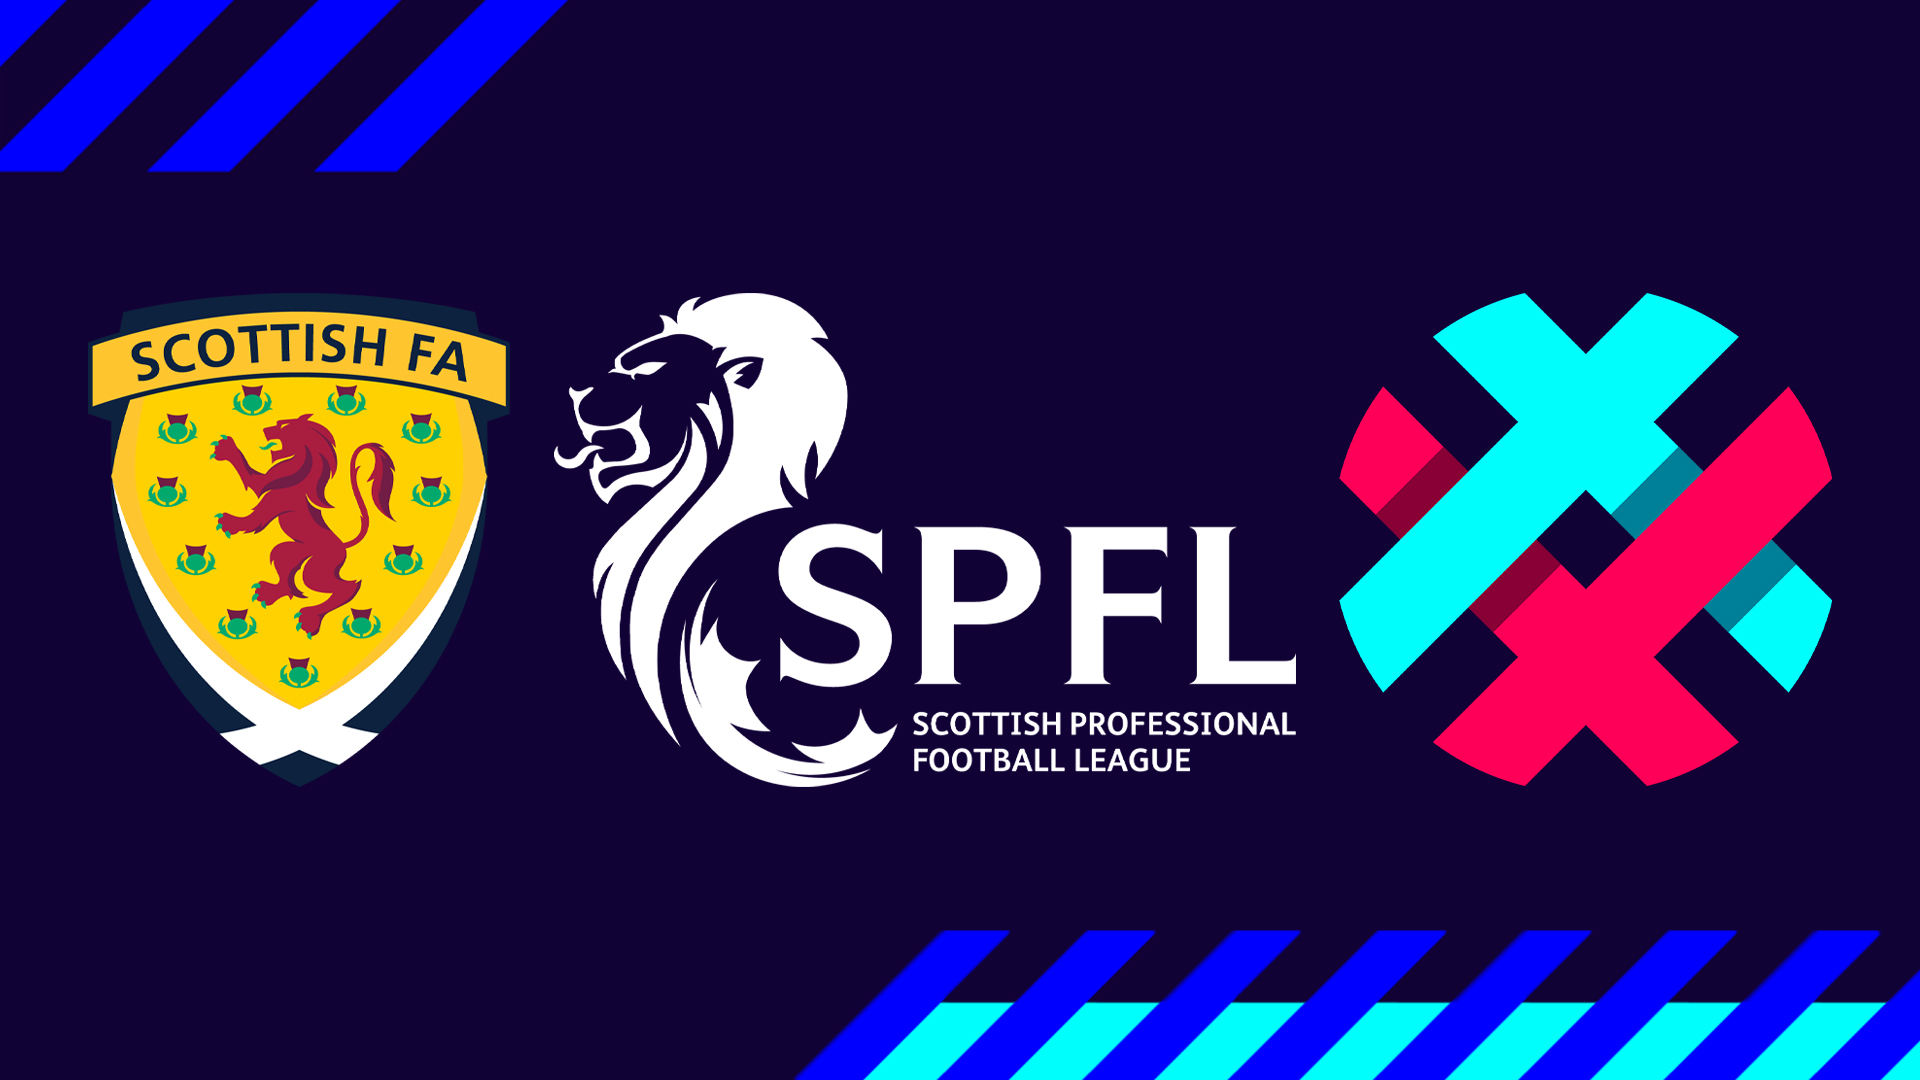 SWPL, Scottish FA, and SPFL join forces to create exciting new Scottish Football Marketing Division